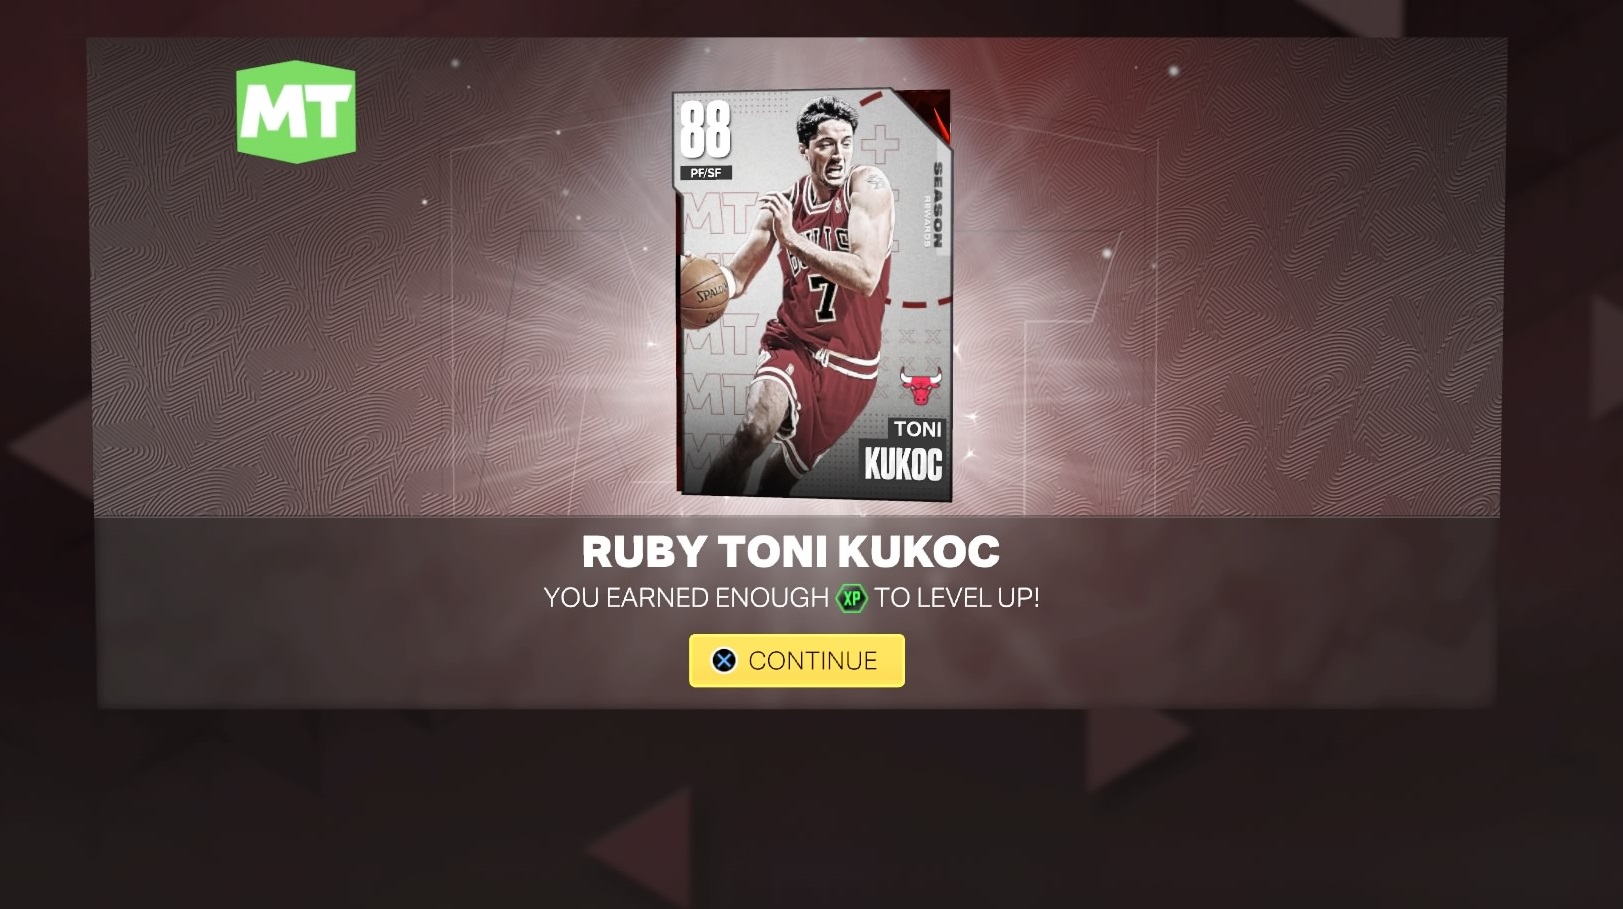 The EASIEST Trophy Case in NBA 2k23 MyTEAM!! 1 Hour for a Pink Diamond!! 